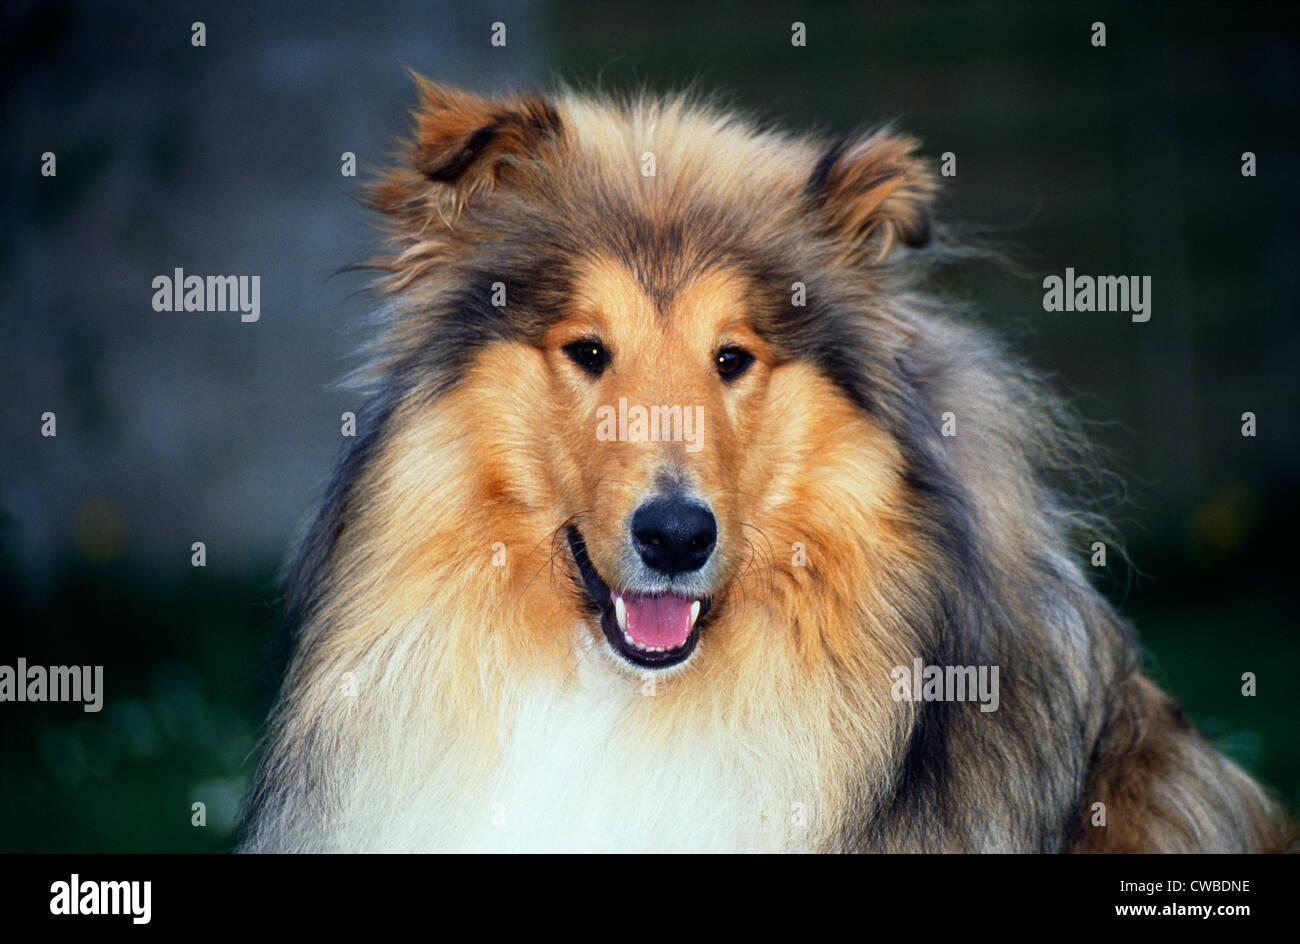 Lassie famous rough collie movie star dog poses in woodland 8x10 inch photo